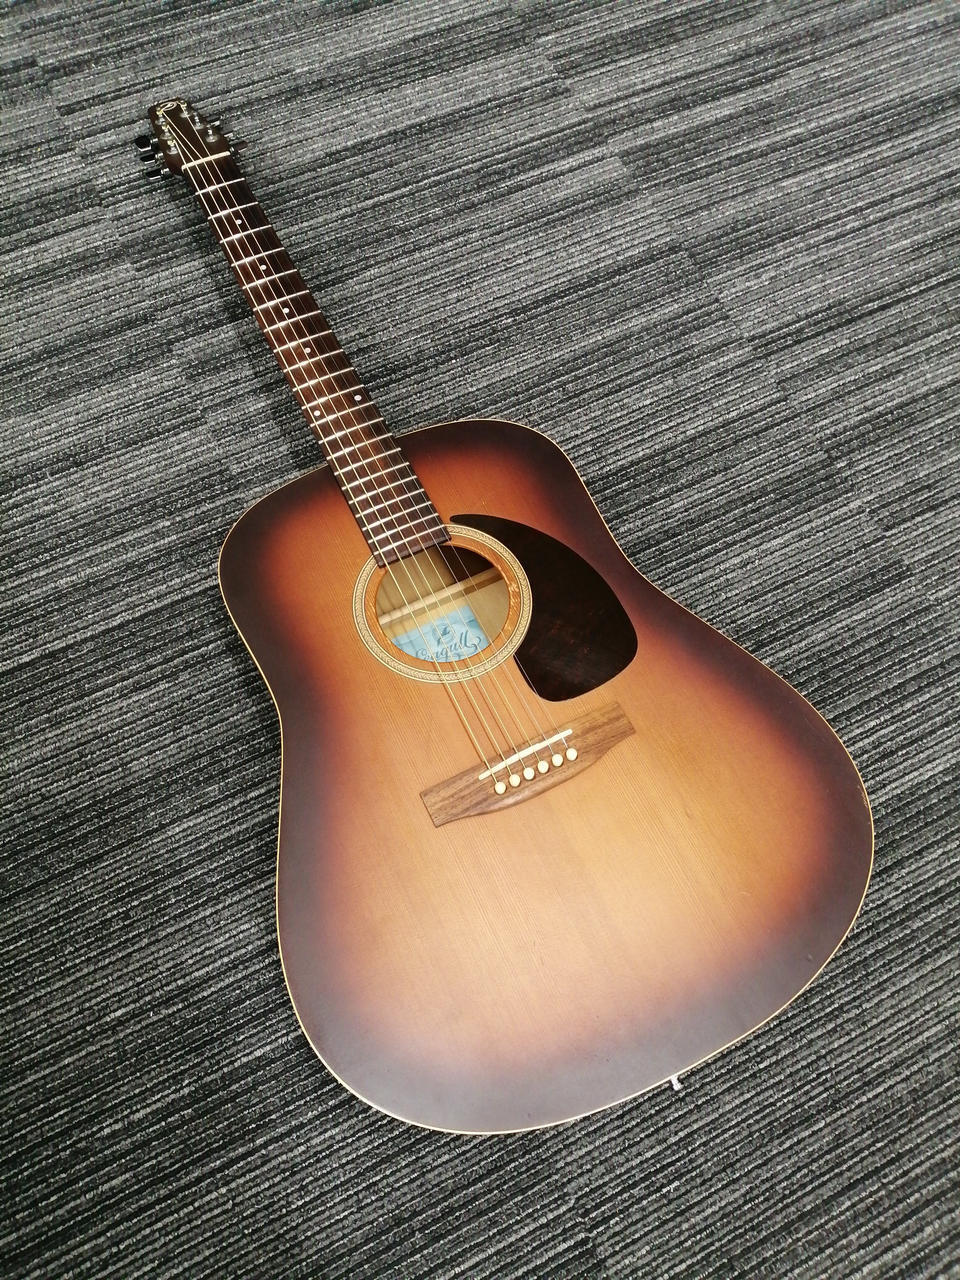 Seagull S6 Tobacco-Burst Acoustic Guitar Safe delivery from Japan